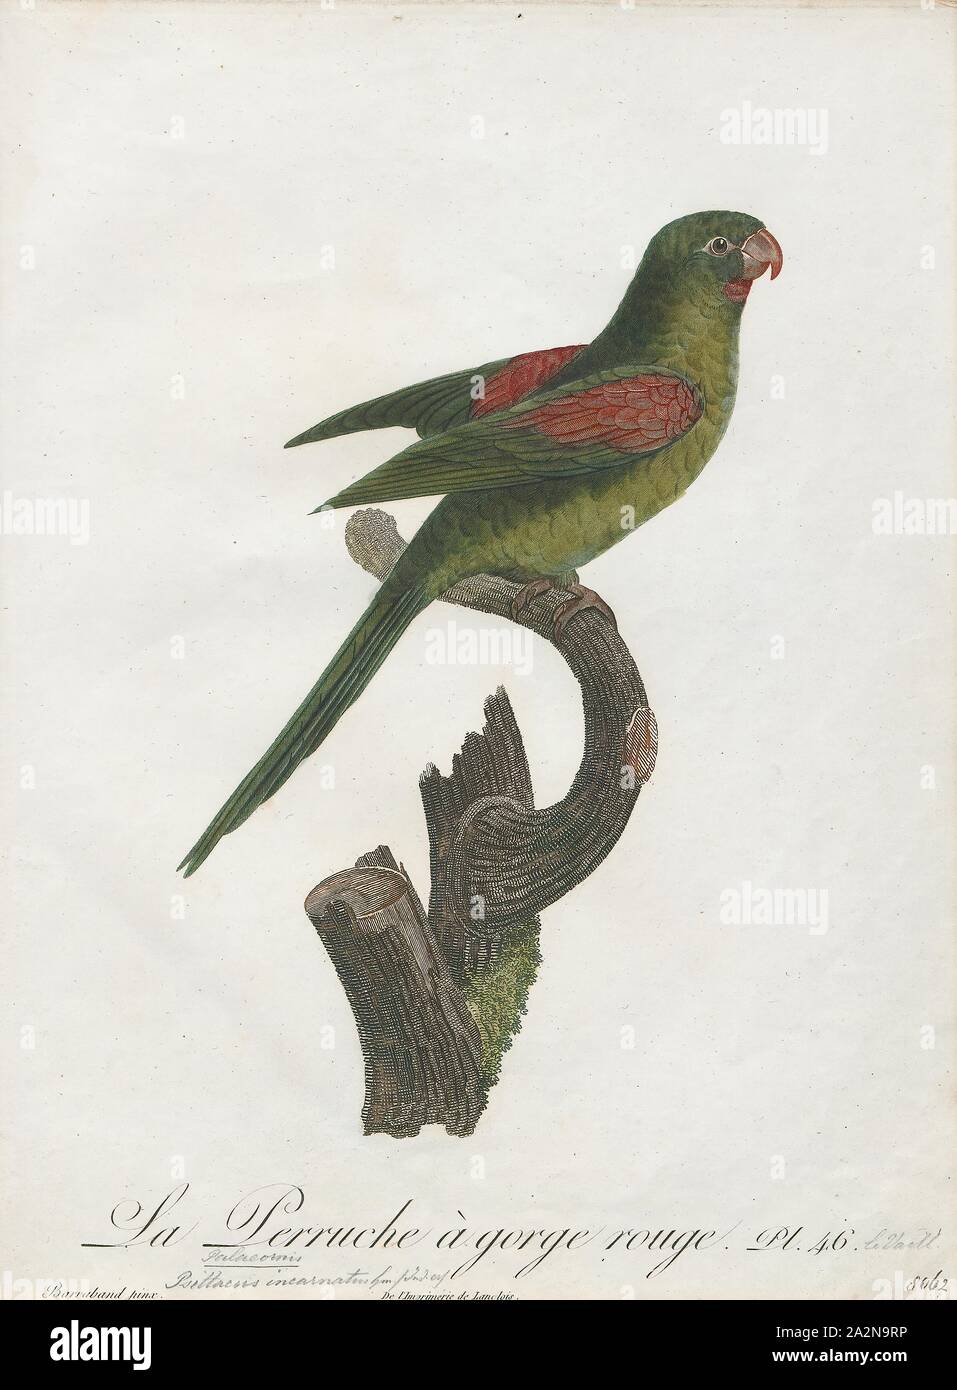 Palaeornis incarnatus, Print, Psittacula, Members of the parrot genus Psittacula or Afro-Asian ring-necked parakeets as they are commonly known in aviculture originates found from Africa to South-East Asia. It is a widespread group, with a clear concentration of species in south Asia, but also with representatives in Africa and the islands of the Indian Ocean. This is the only genus of Parrot which has the majority of its species in continental Asia. Of all the extant species only Psittacula calthropae, Psittacula caniceps and Psittacula echo do not have a representative subspecies in any part Stock Photo